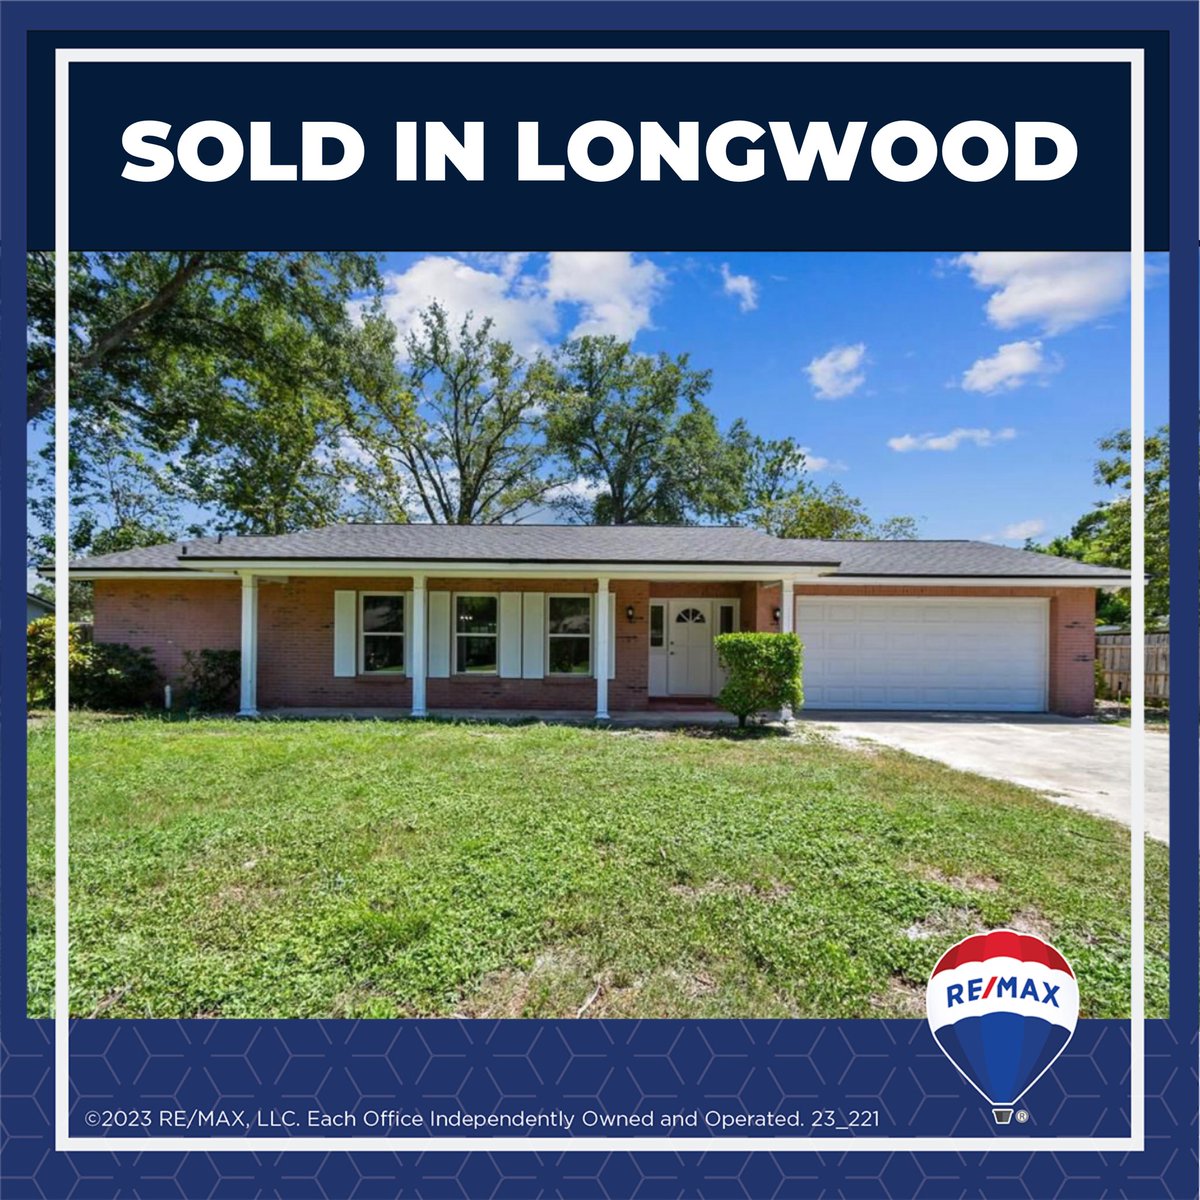 🔥SOLD IN LONGWOOD🔥 

From Lakeland to DeLand, we make dreams come true. Whether you are buying, selling or leasing, call / text at 321-939-3004 or connect with us on social media at rem.ax/sm23
 
#remax #zillow #realestate #sold#remaxmarketplace #sold #longwoodfl